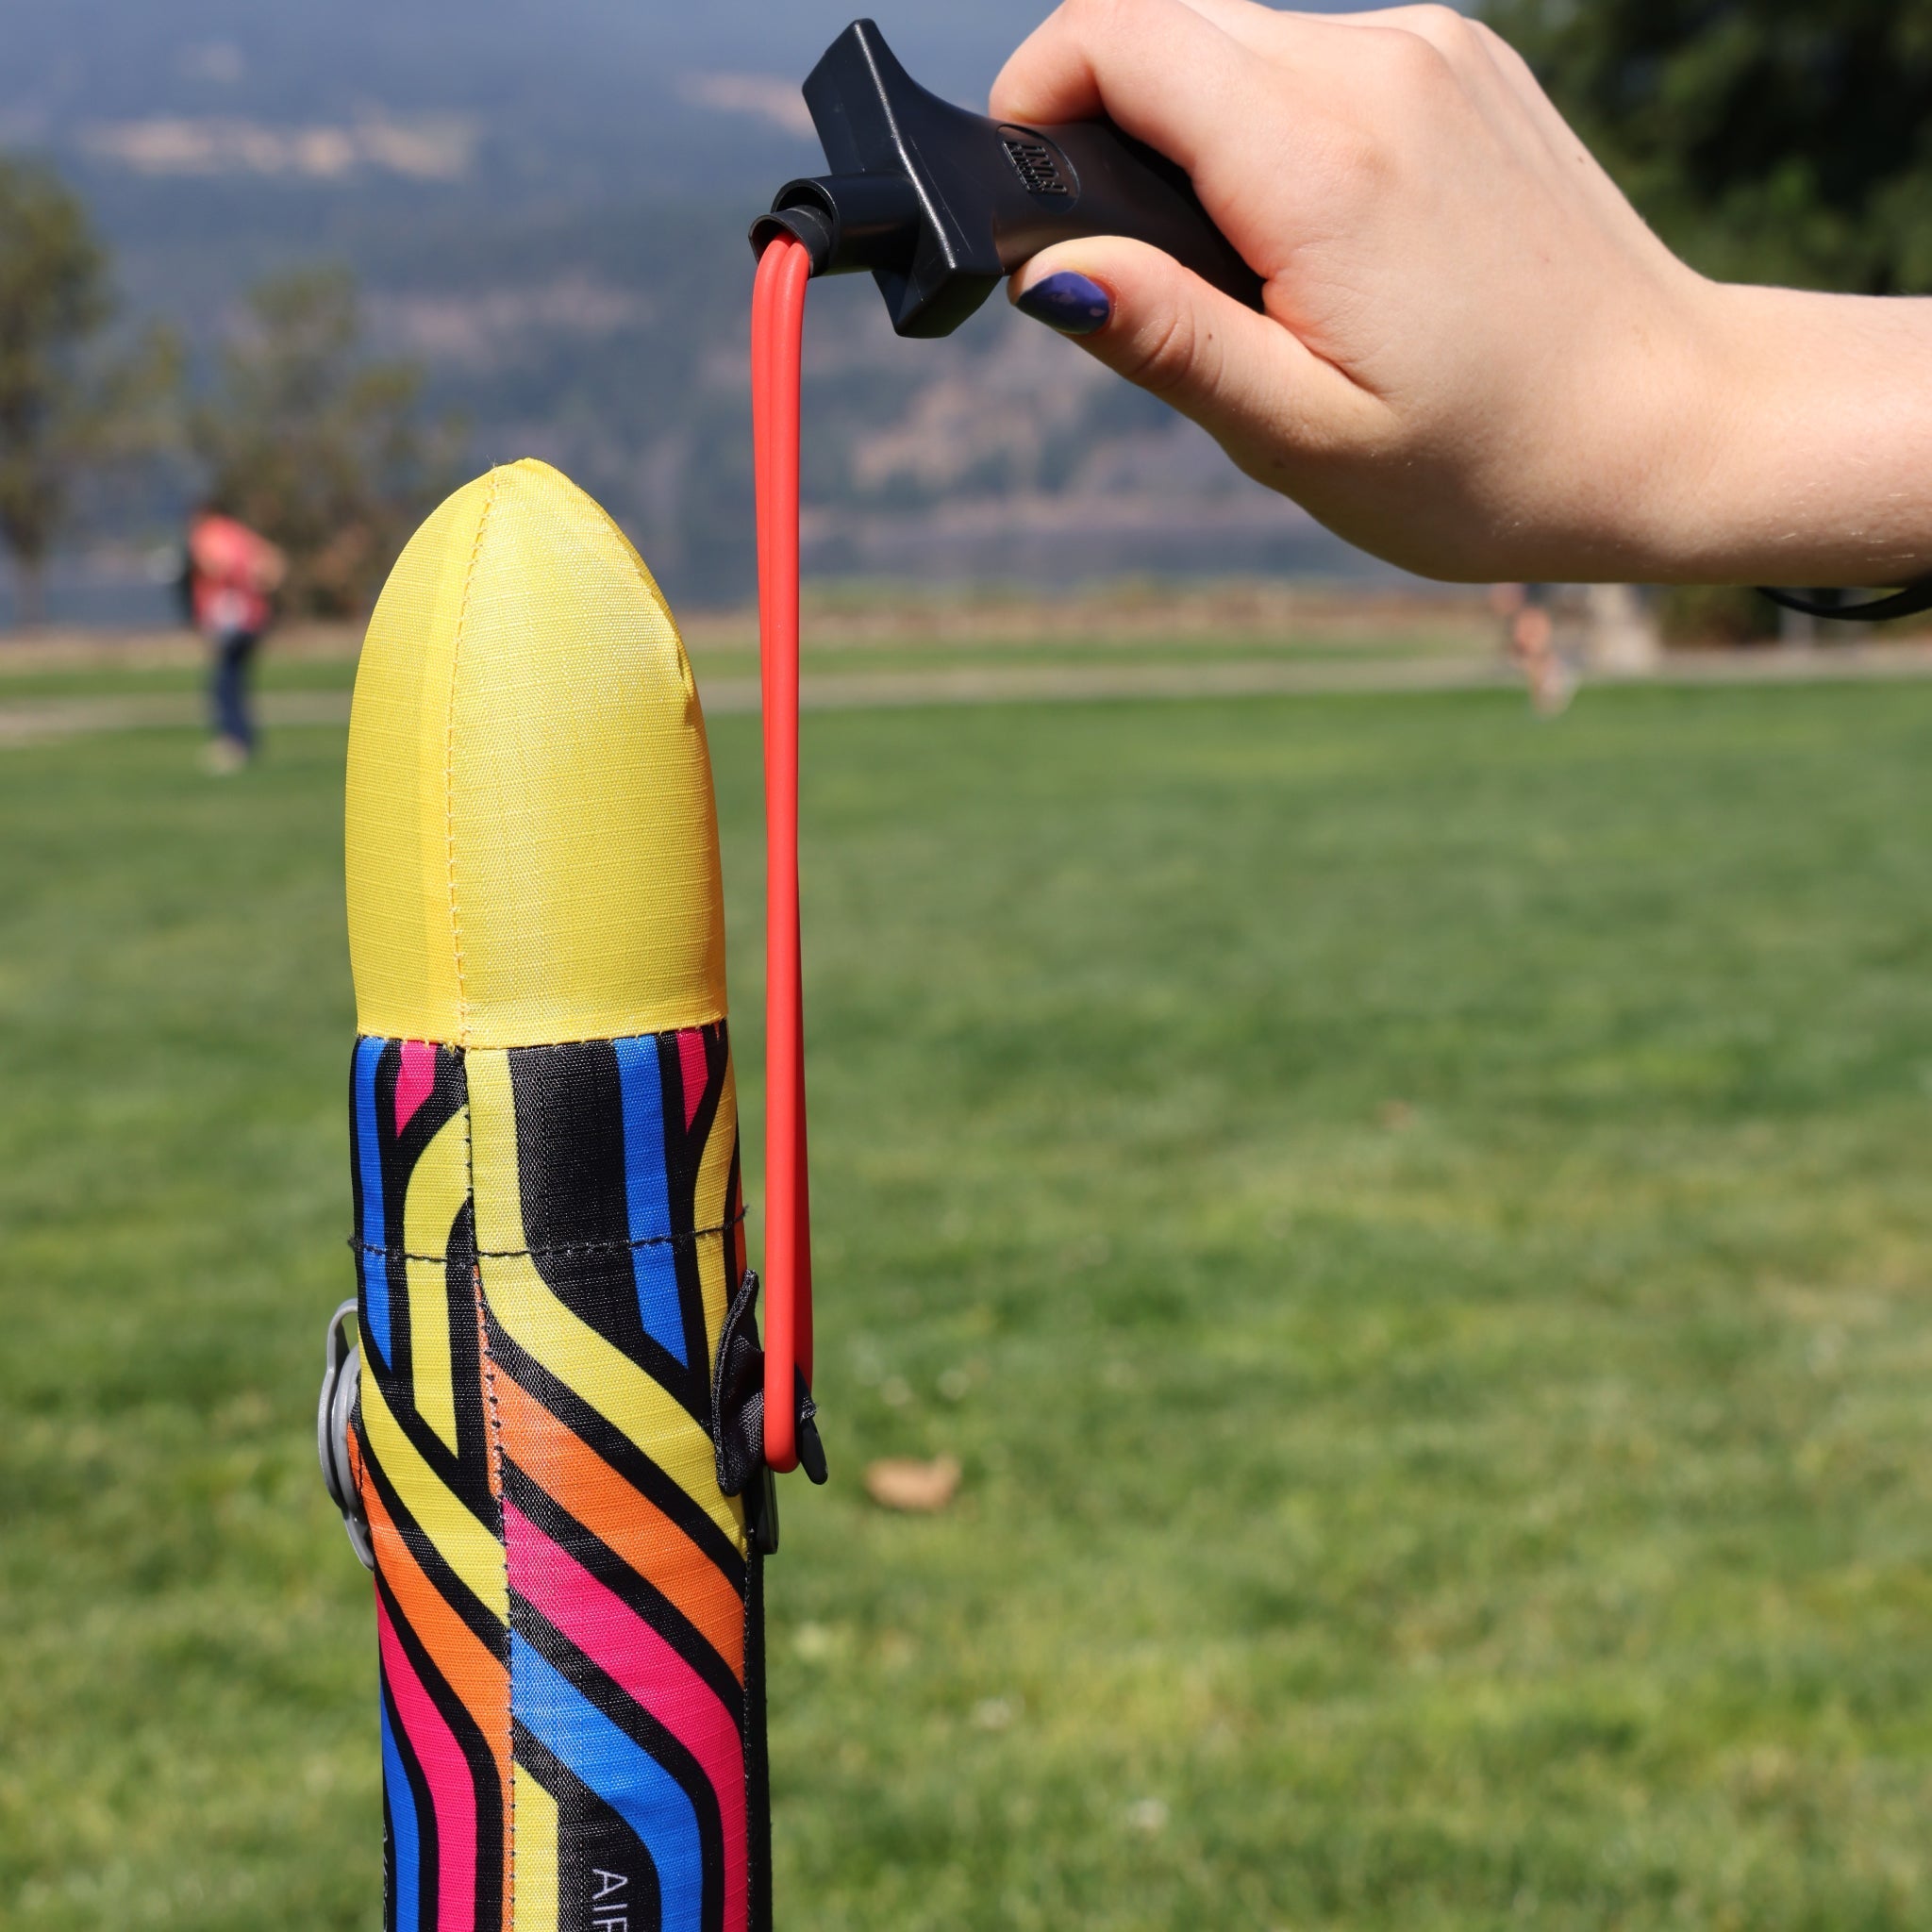 Yellow Airo Rocket toy rocket being launched outside. By Mighty Fun!